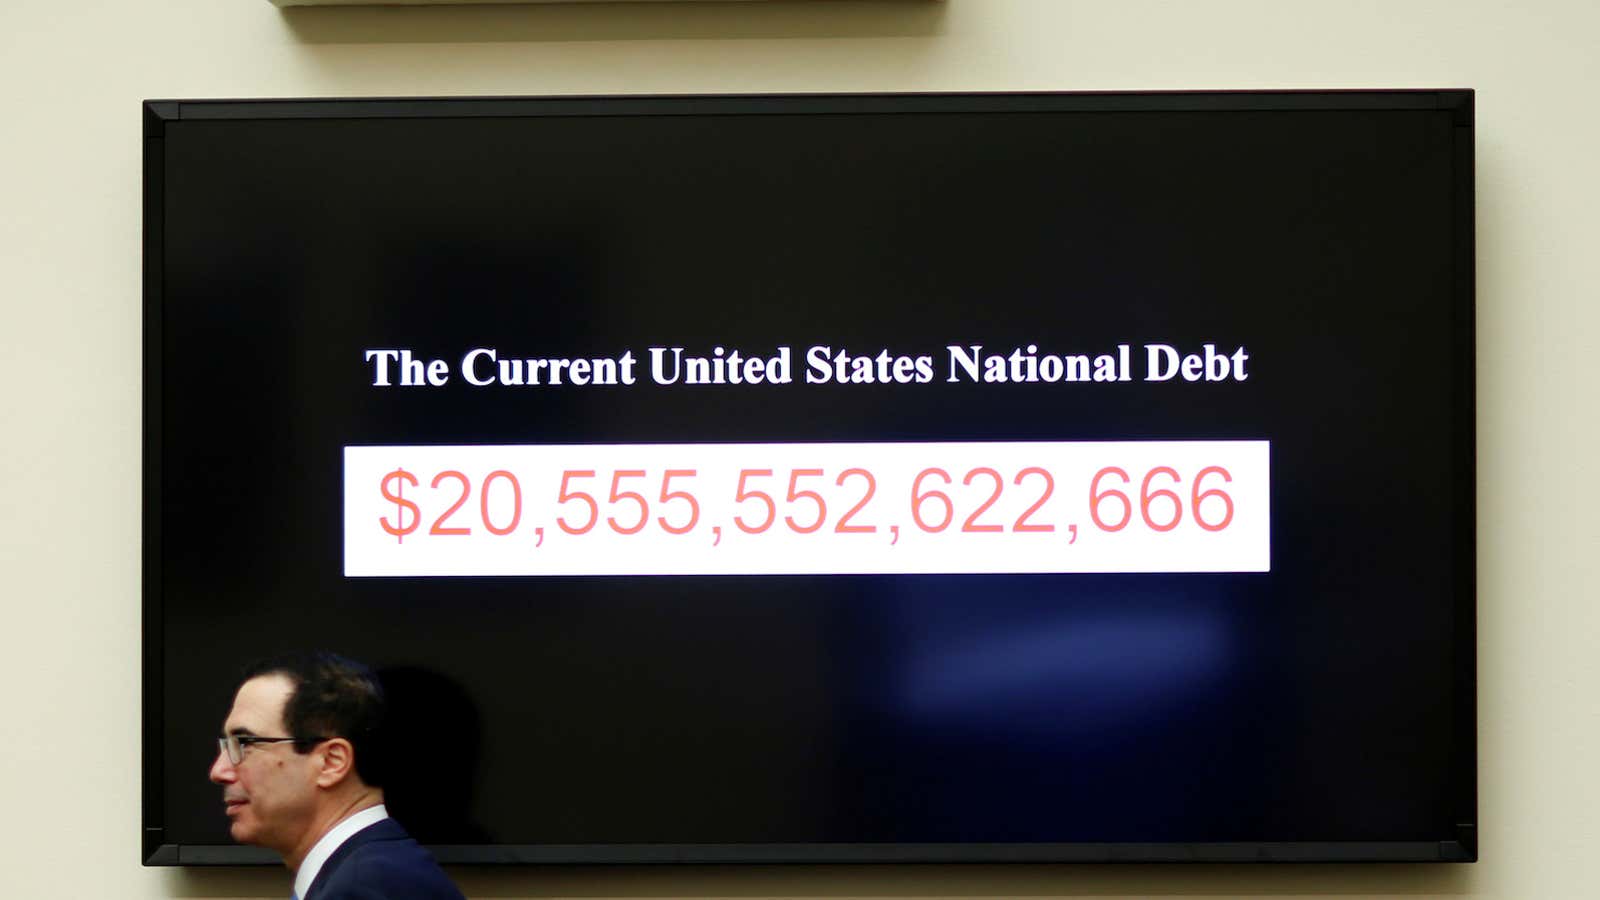 Maybe we need a private-equity debt clock?